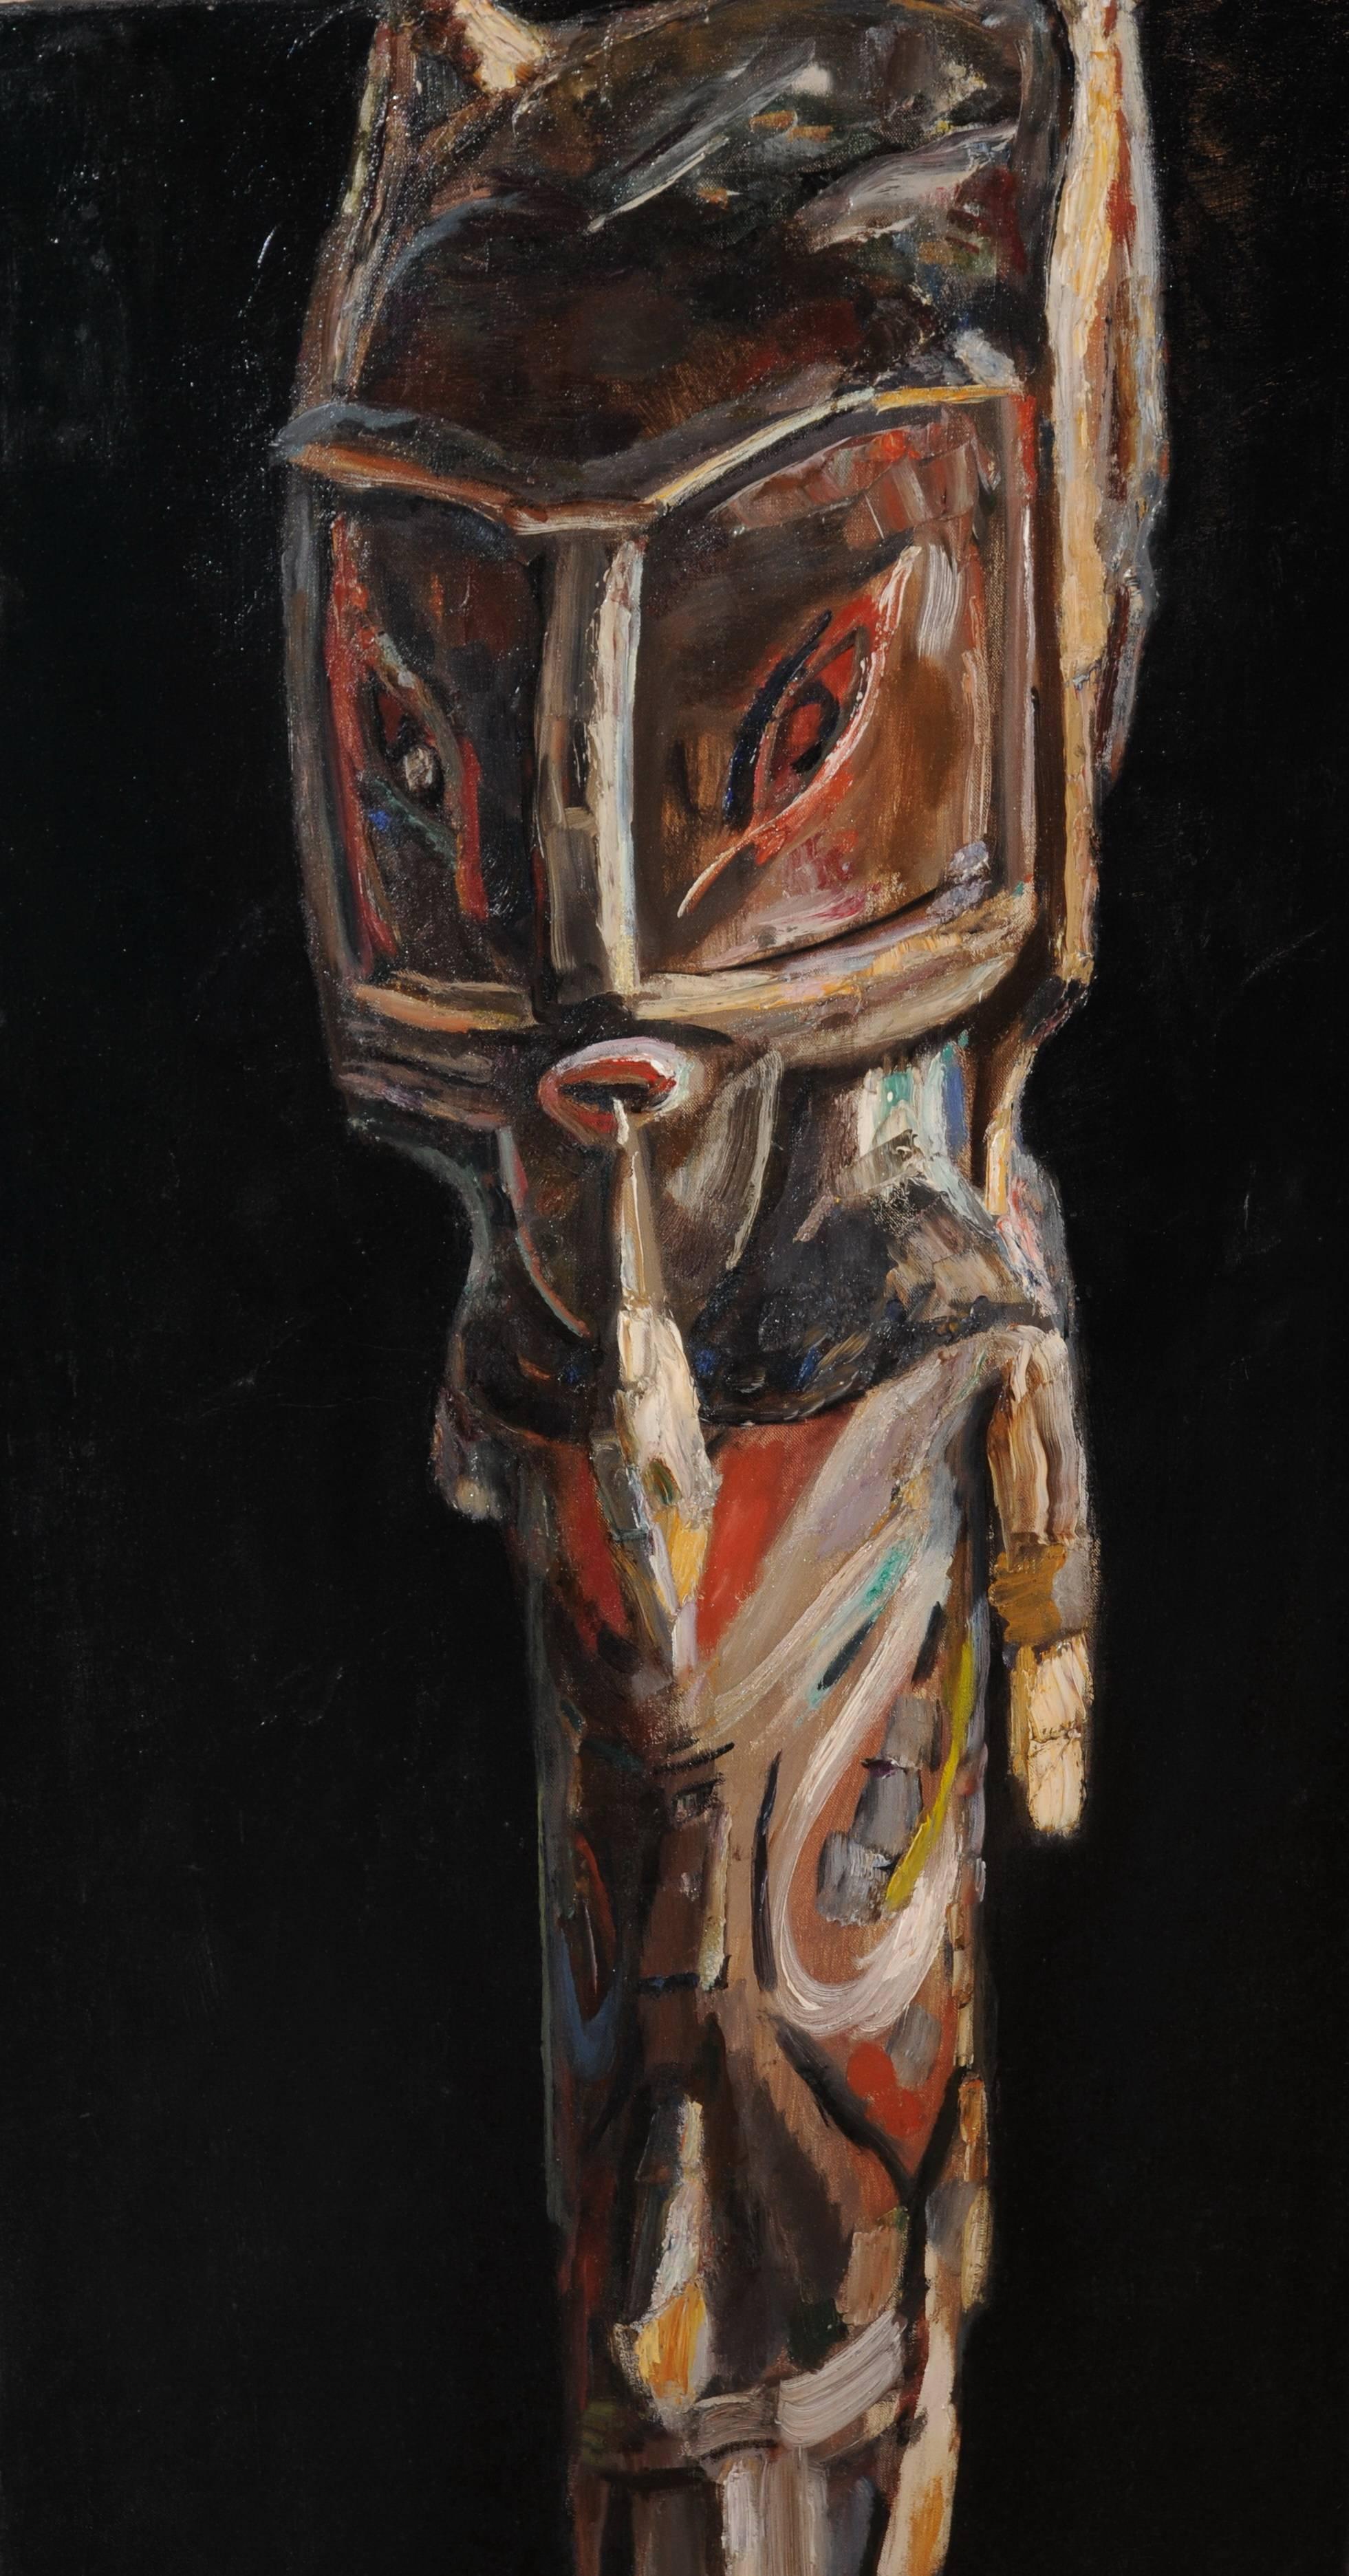 A Malagan statue from Papua New Guinea
There is a closly related painting known depicting the same statue within a still-life also painted by Jan Sluijters circa 1935.

Sluijters was a leading pioneer of various post-impressionist movements in The